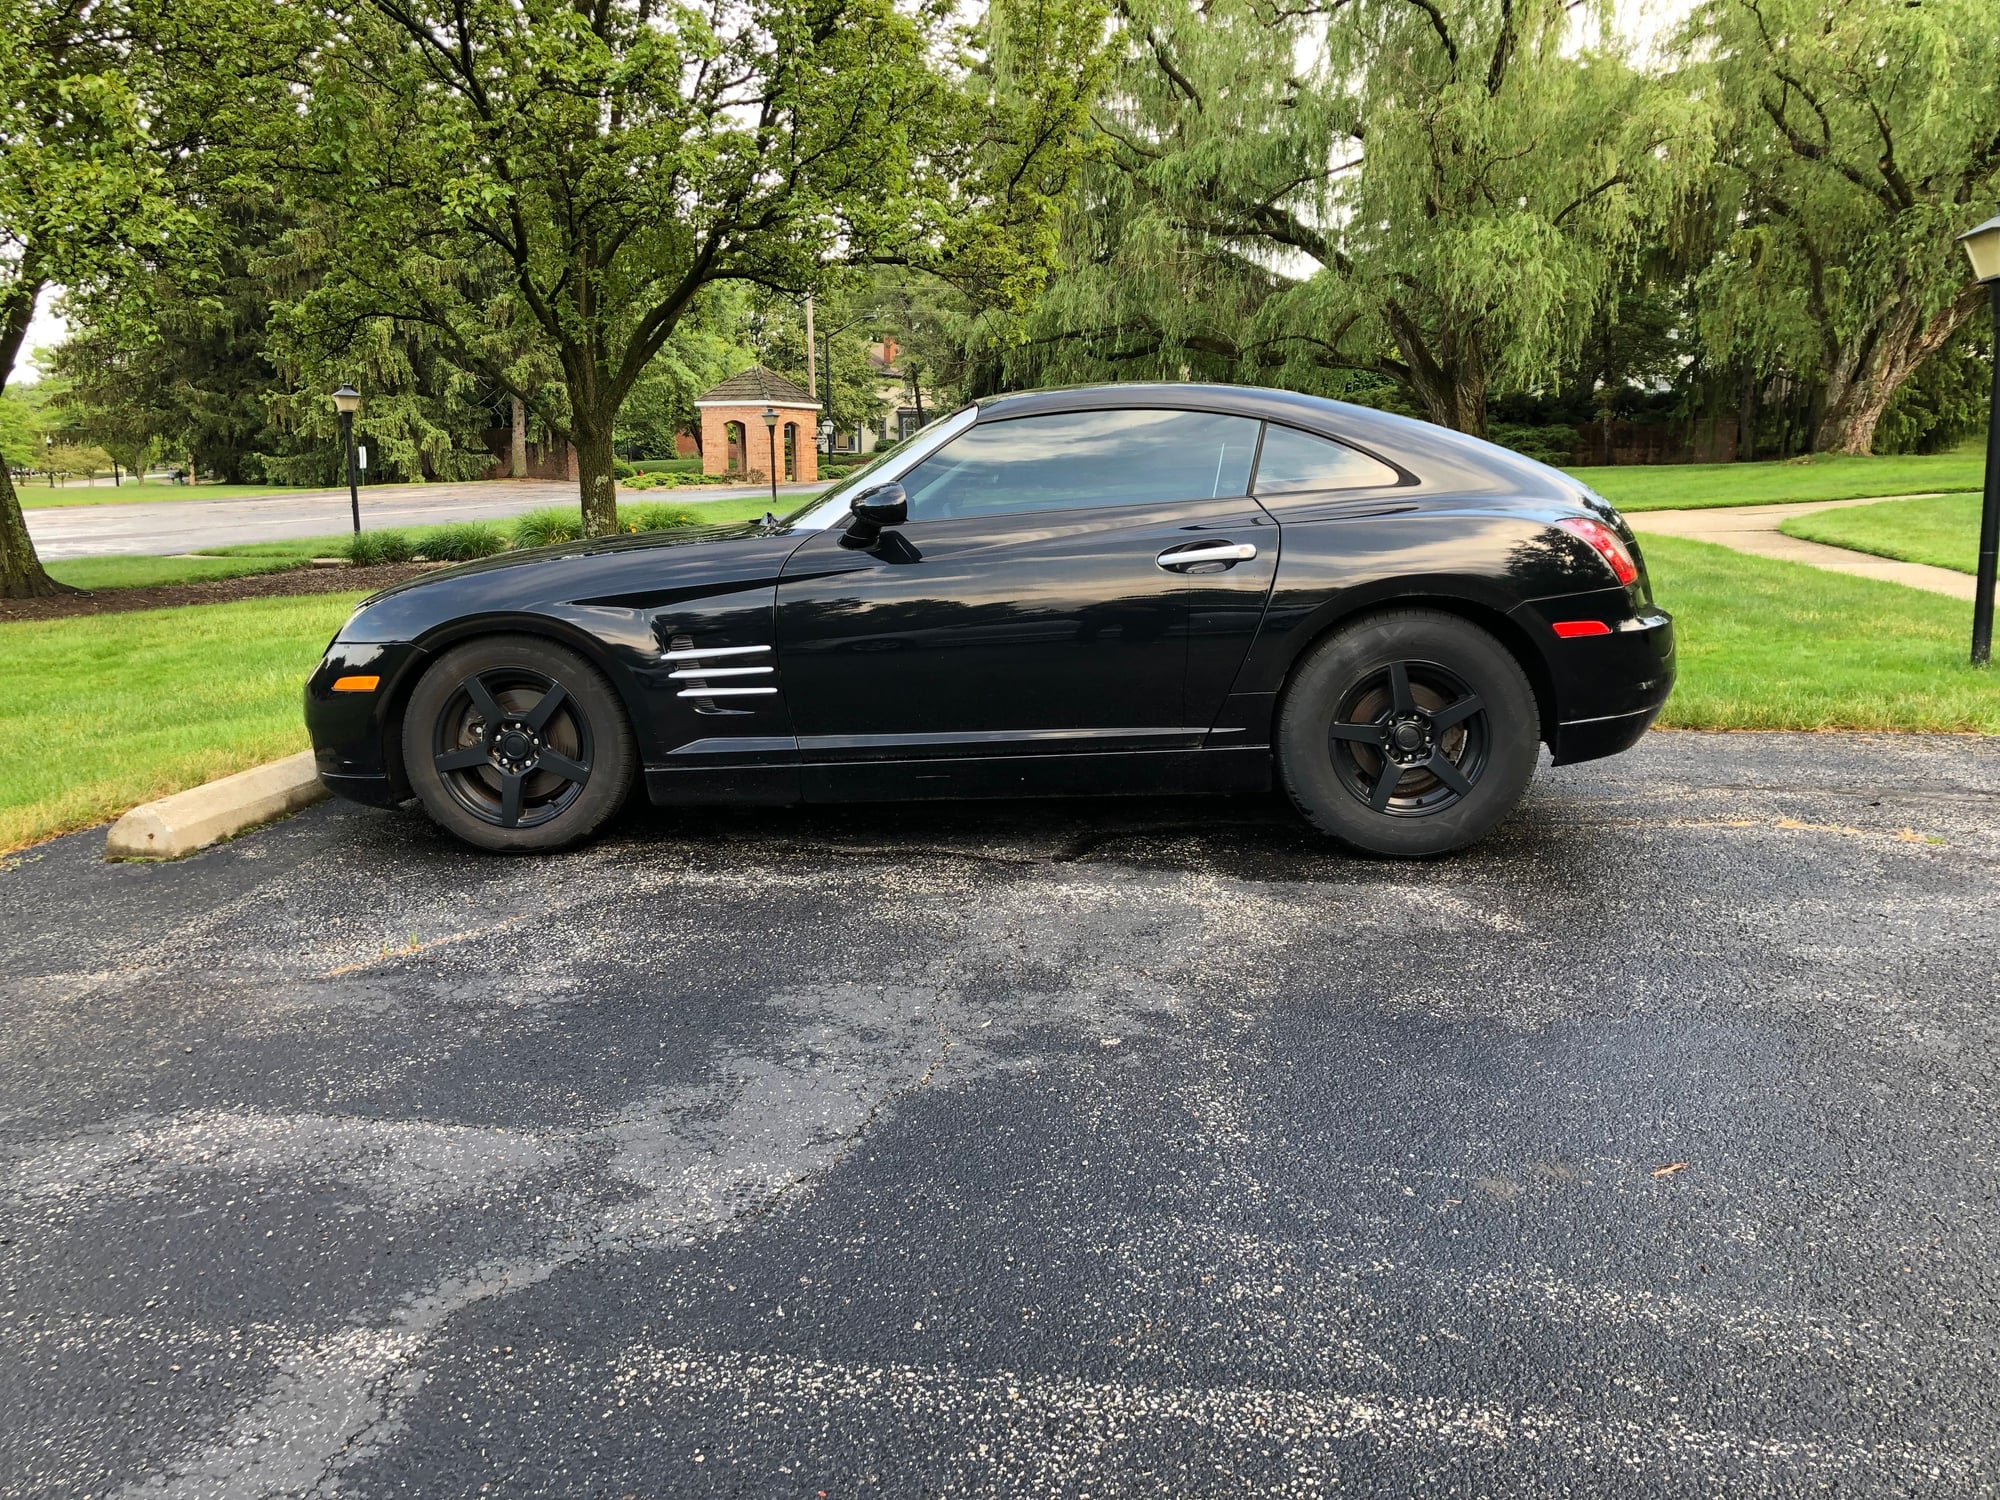 2004 Chrysler Crossfire - 2004 Chrysler Crossfire w/mods - Used - VIN 1can69l14x001438 - 123,000 Miles - 6 cyl - 2WD - Coupe - Black - Stow, OH 44224, United States